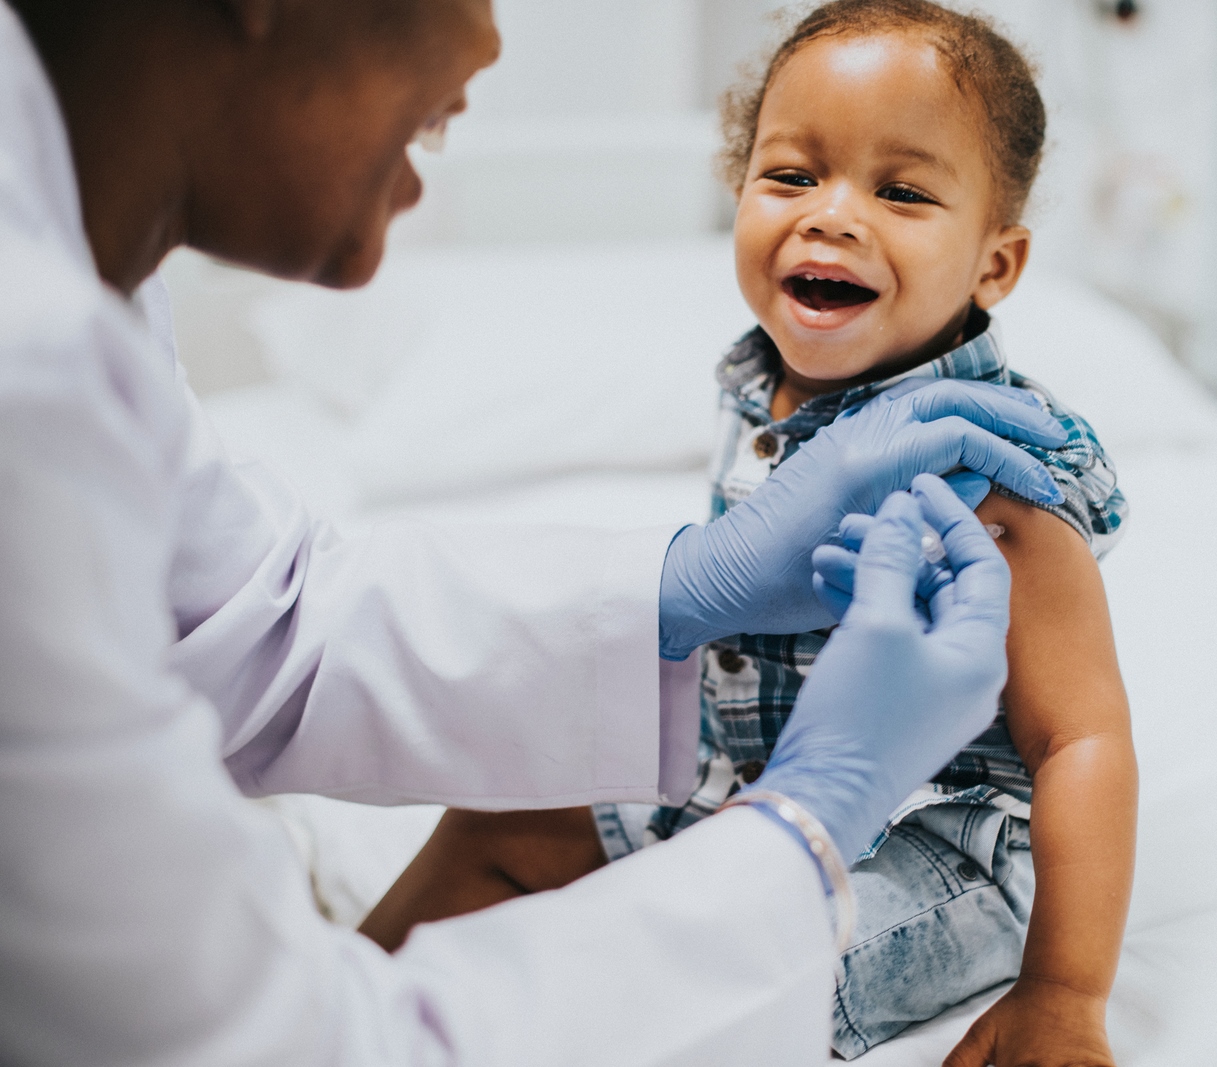 bigstock-Toddler-getting-a-vaccination-263962228